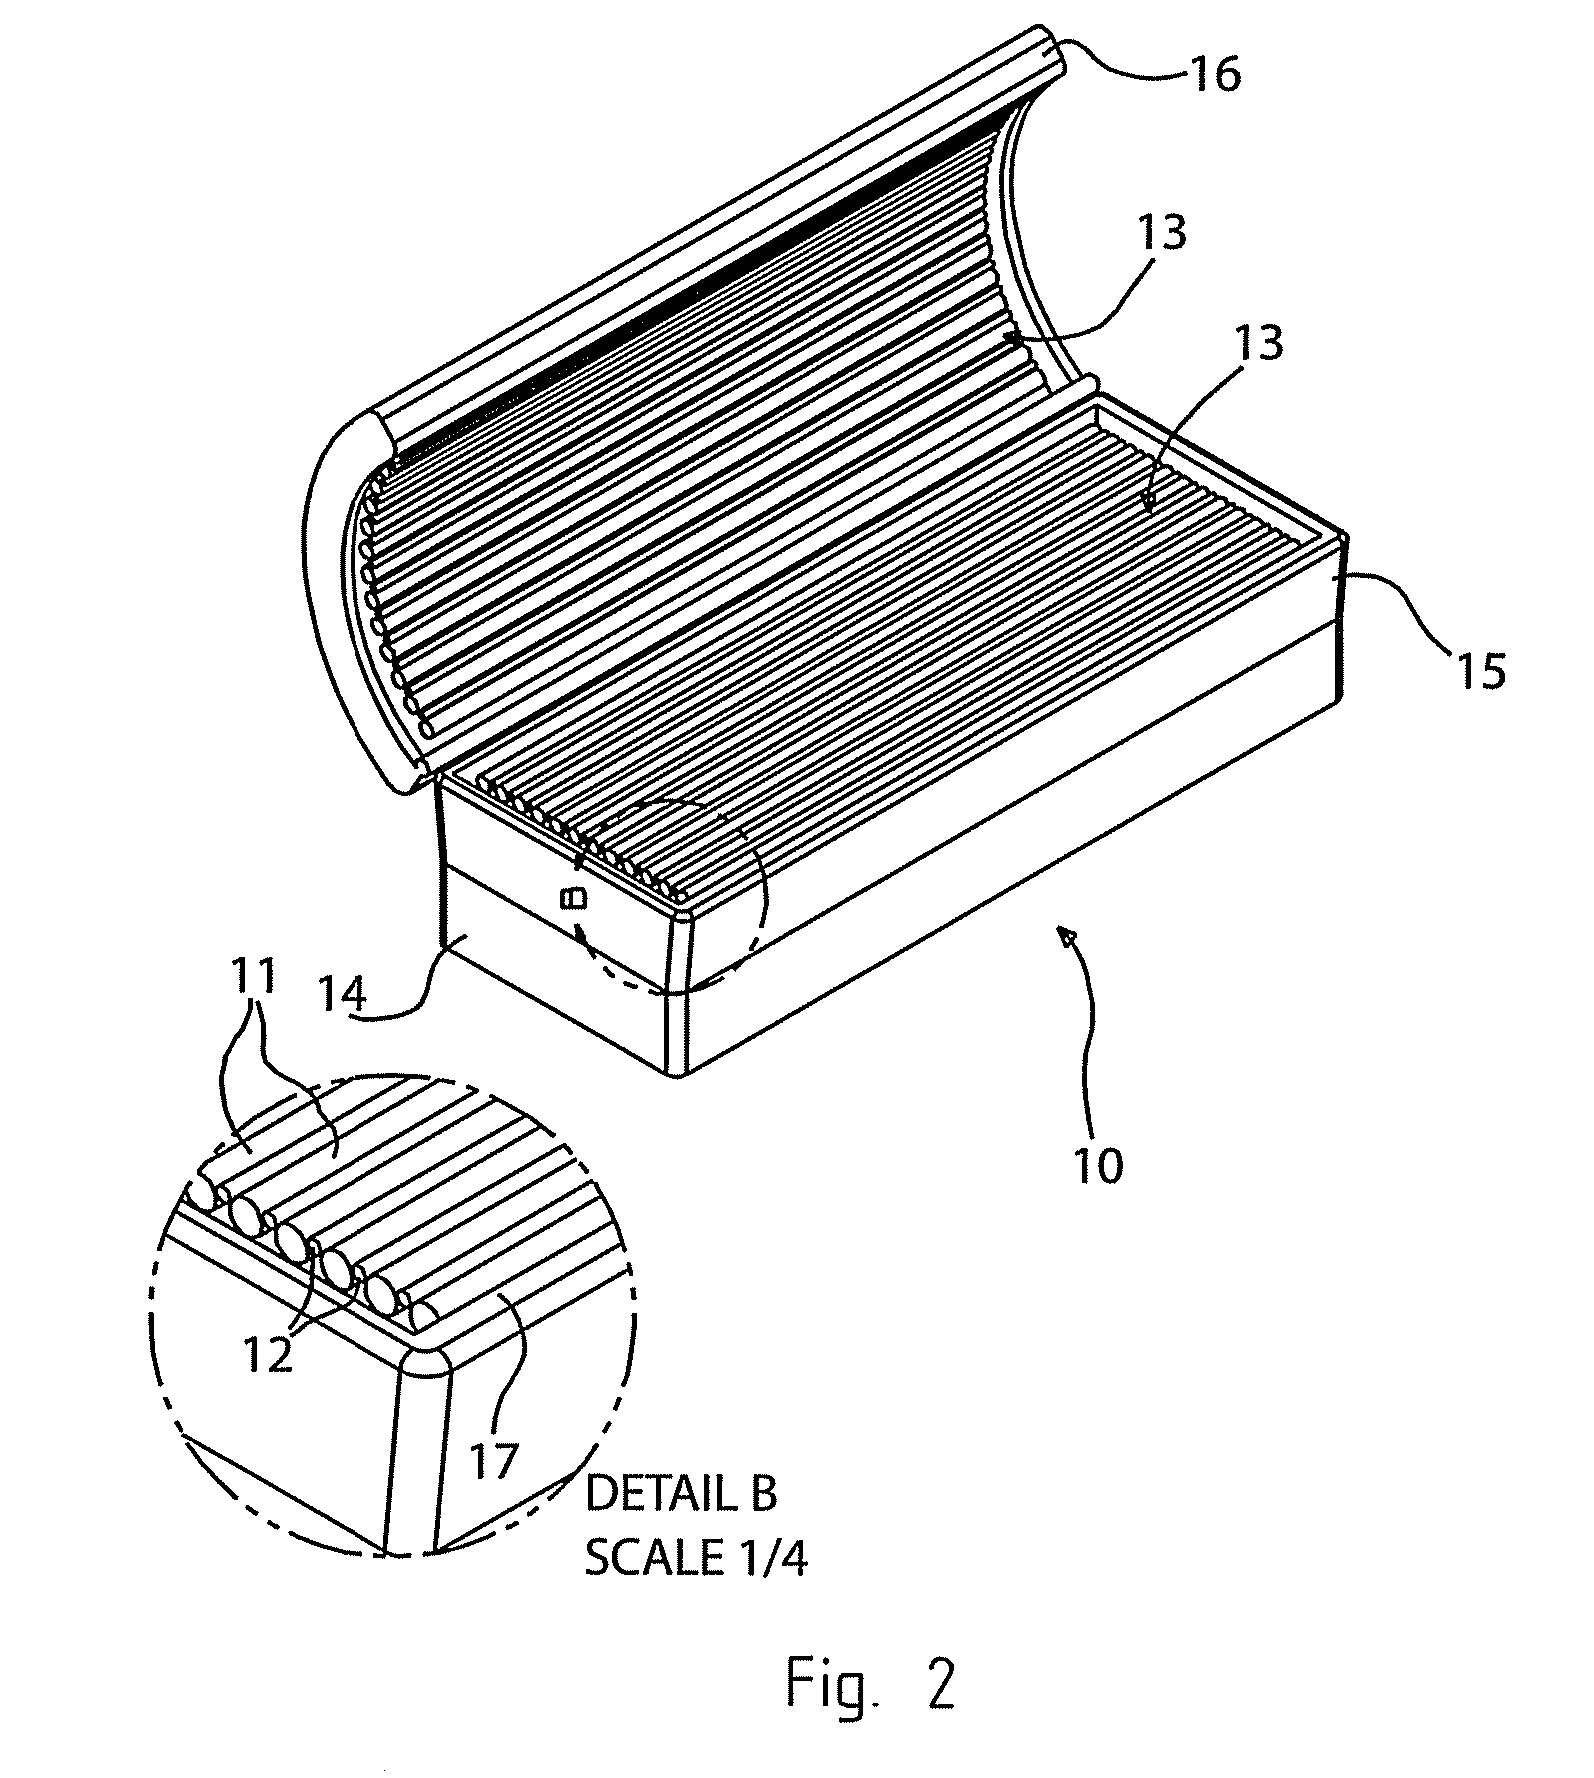 Irradition apparatus for irradiating a human body